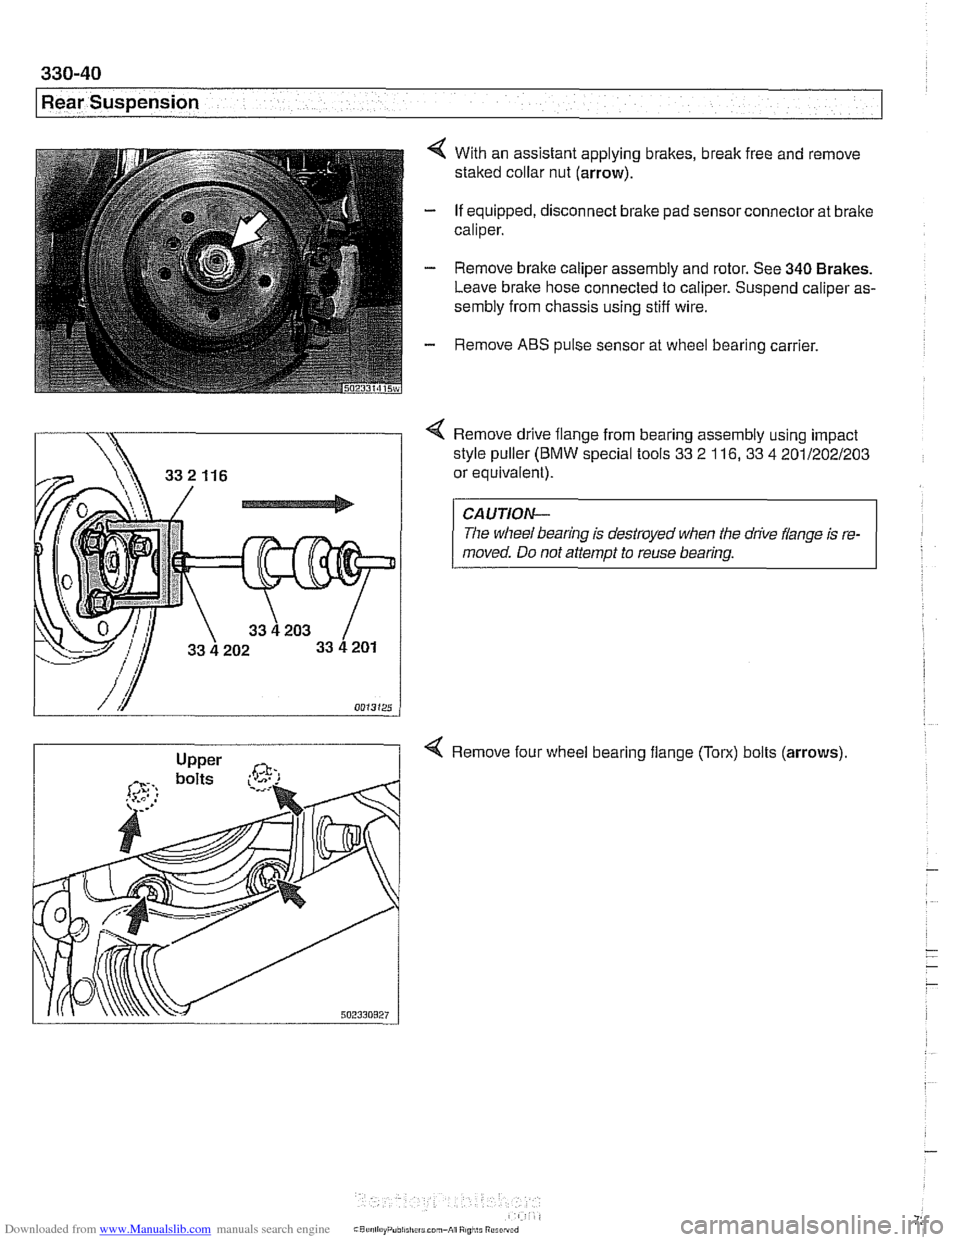 BMW 525i 1998 E39 Workshop Manual Downloaded from www.Manualslib.com manuals search engine 
330-40 
Rear Suspension 
4 With an assistant applying brakes, break free and  remove 
staked  collar nut  (arrow). 
- If equipped,  disconnect